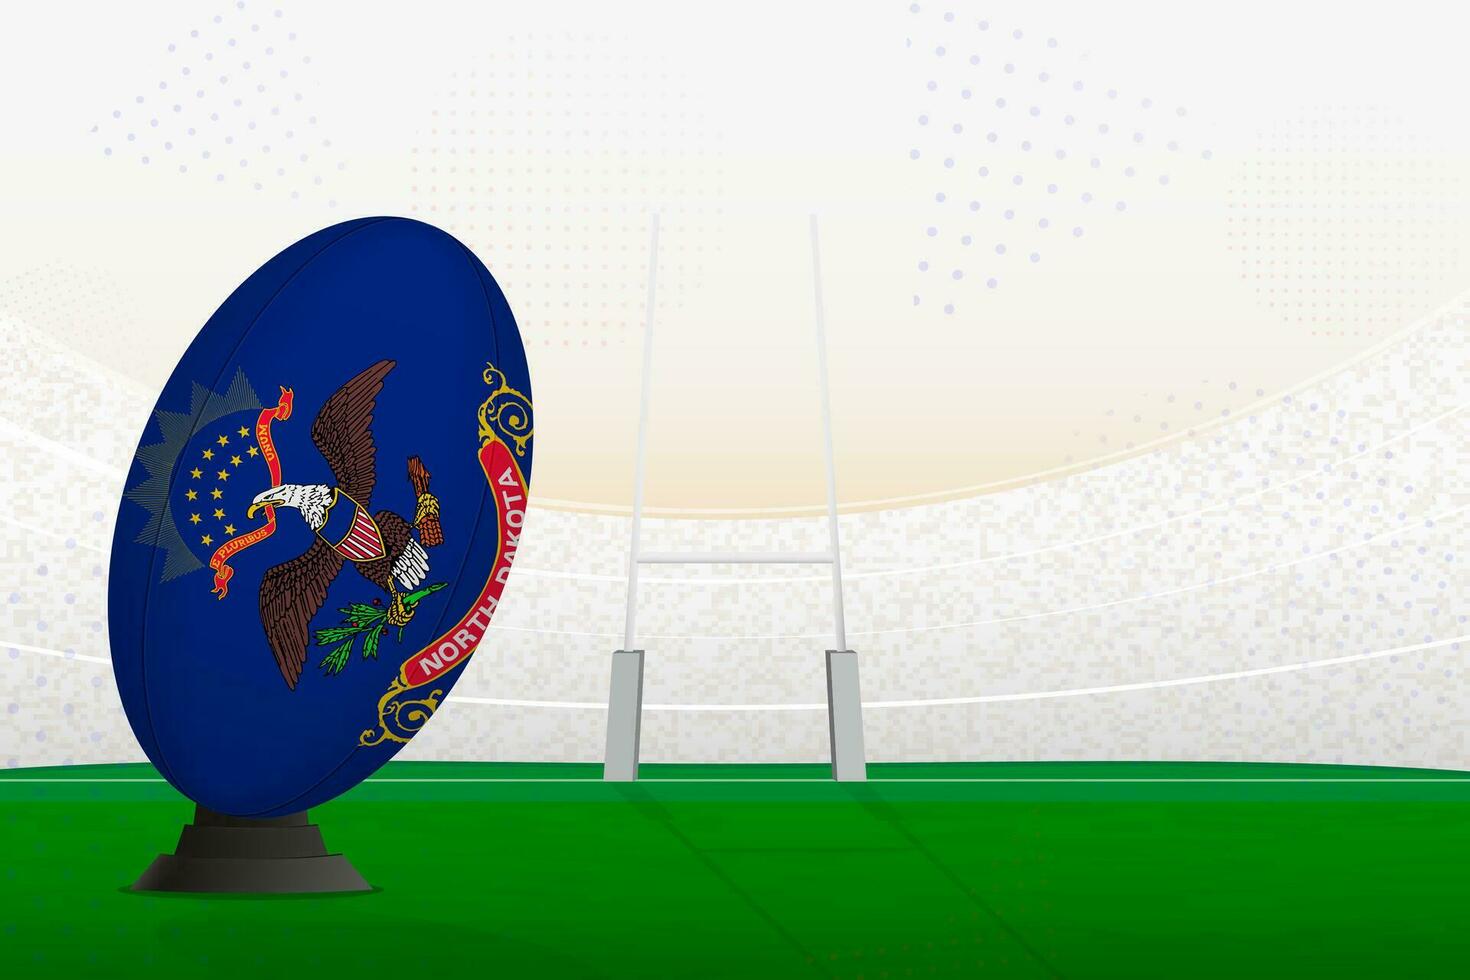 North Dakota national team rugby ball on rugby stadium and goal posts, preparing for a penalty or free kick. vector